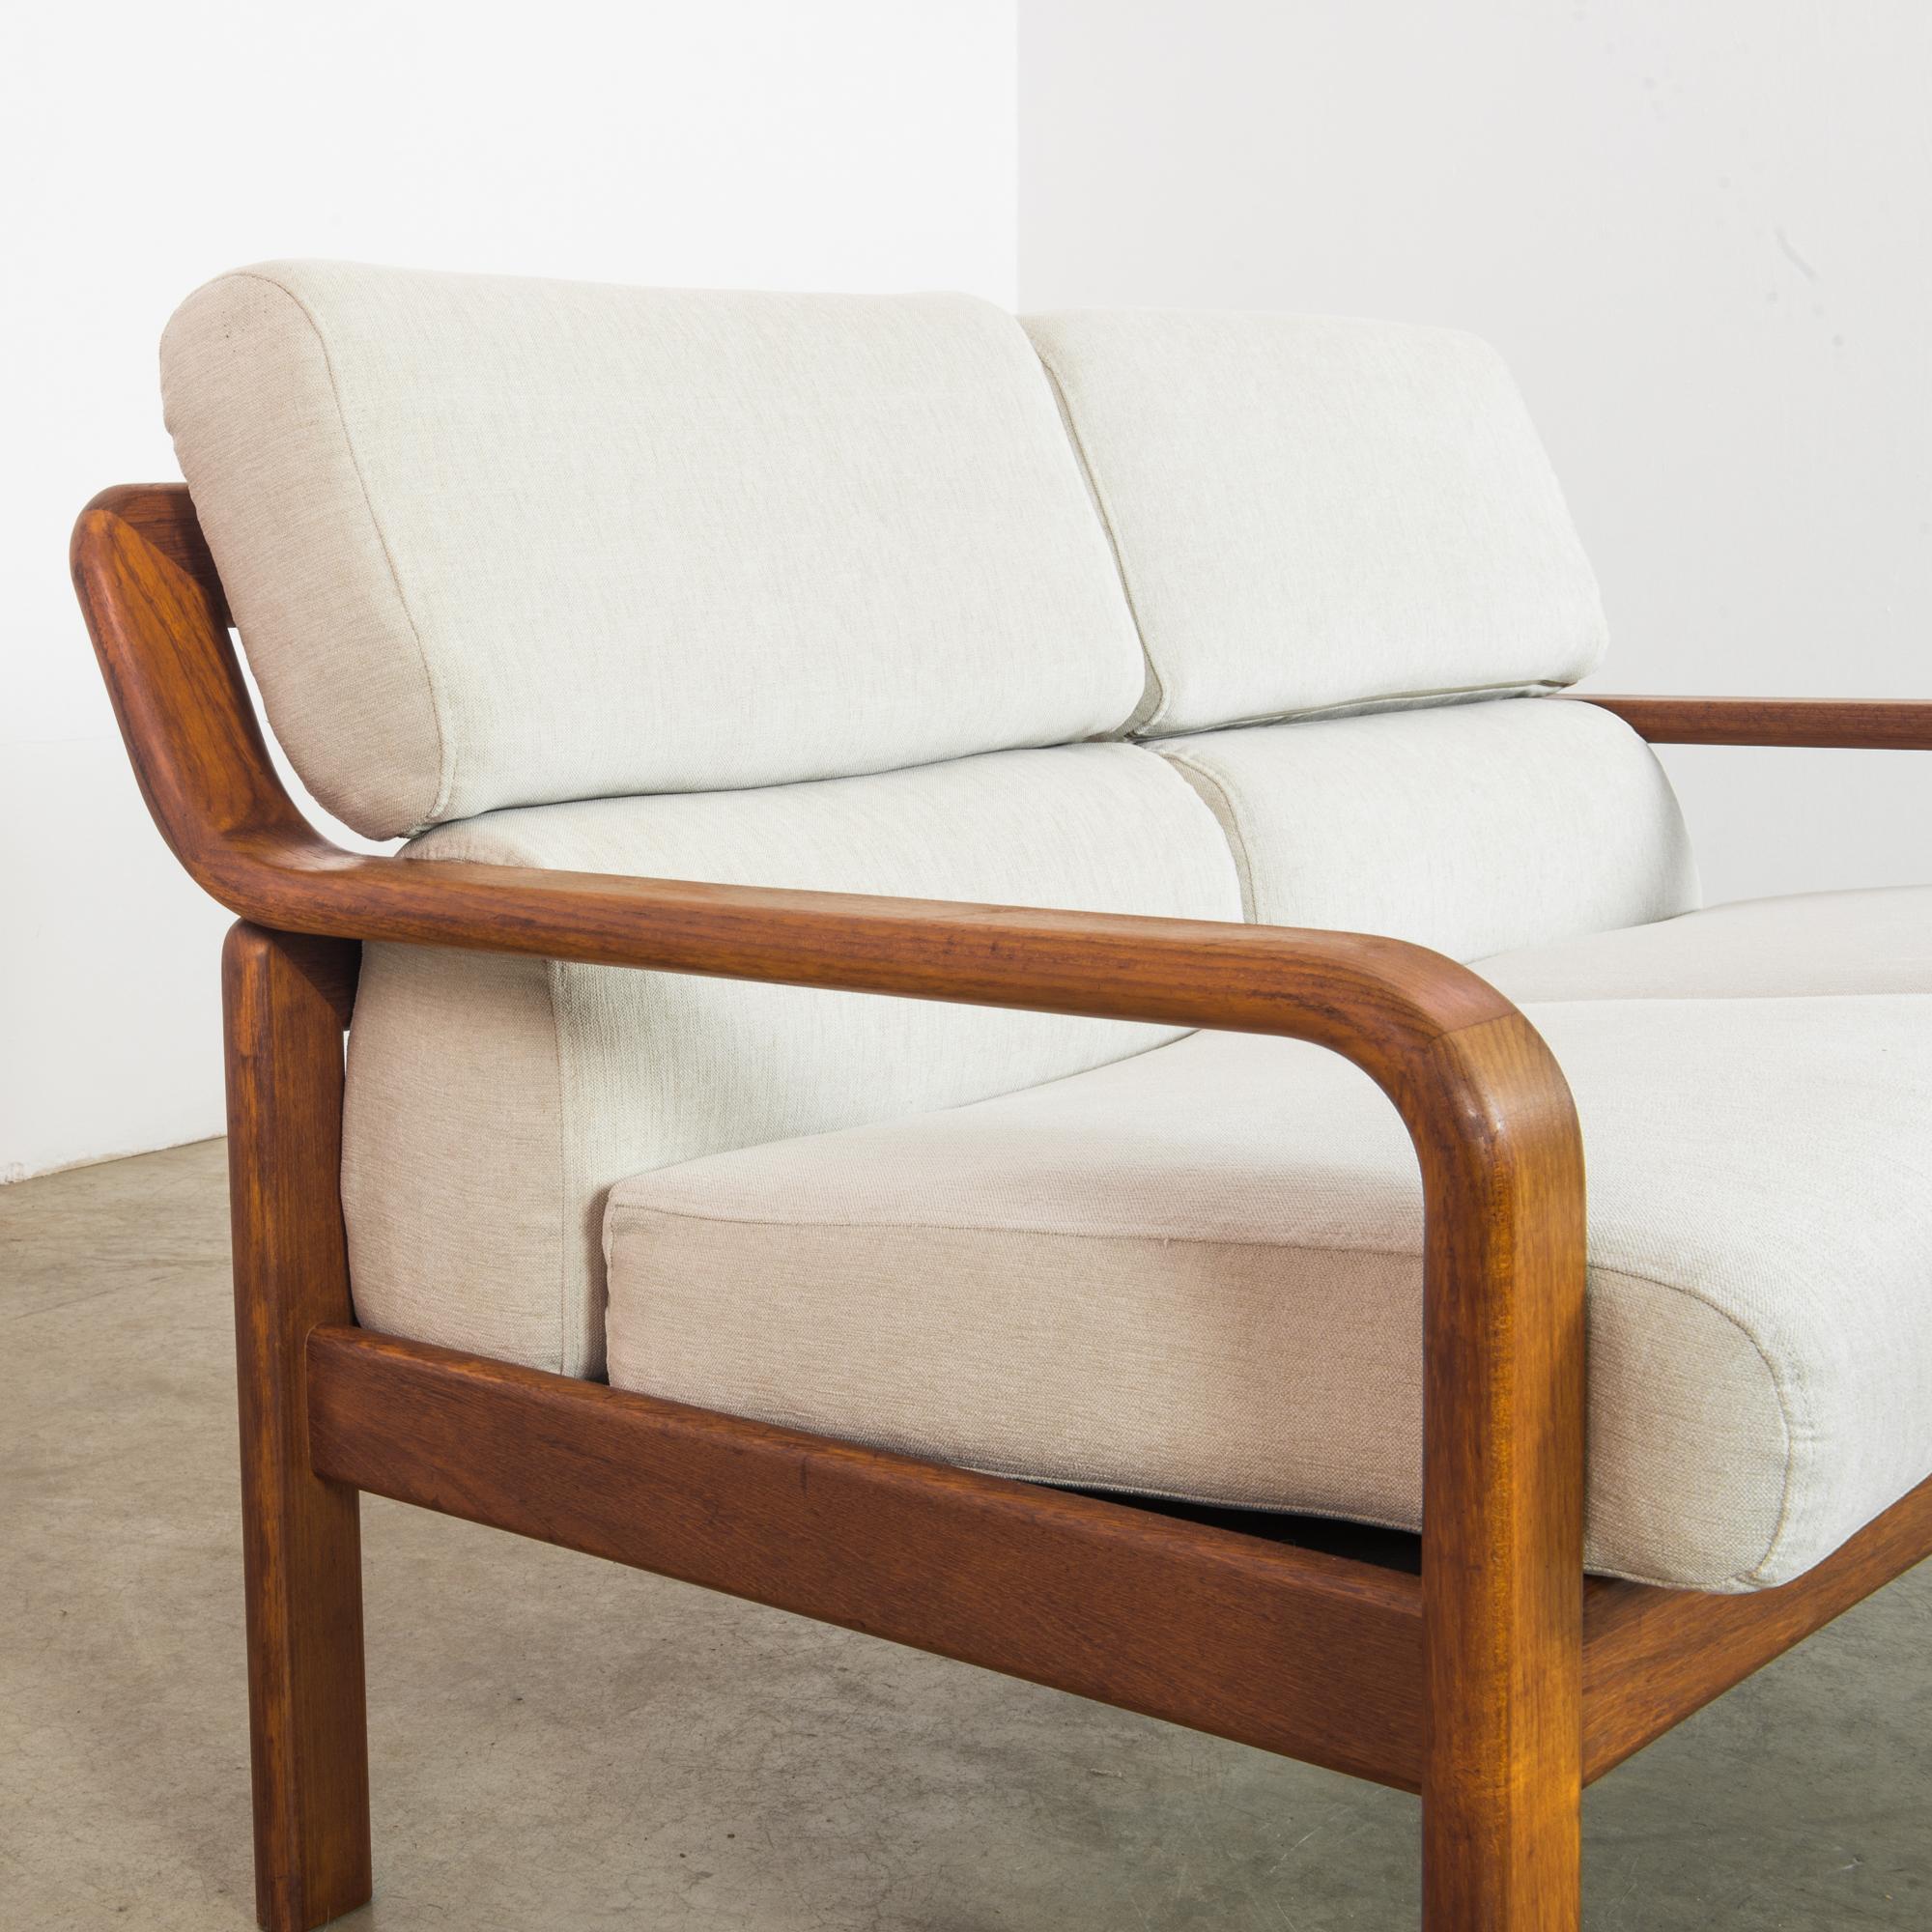 Upholstery 1960s Danish Teak Sofa with Upholstered Seat and Back